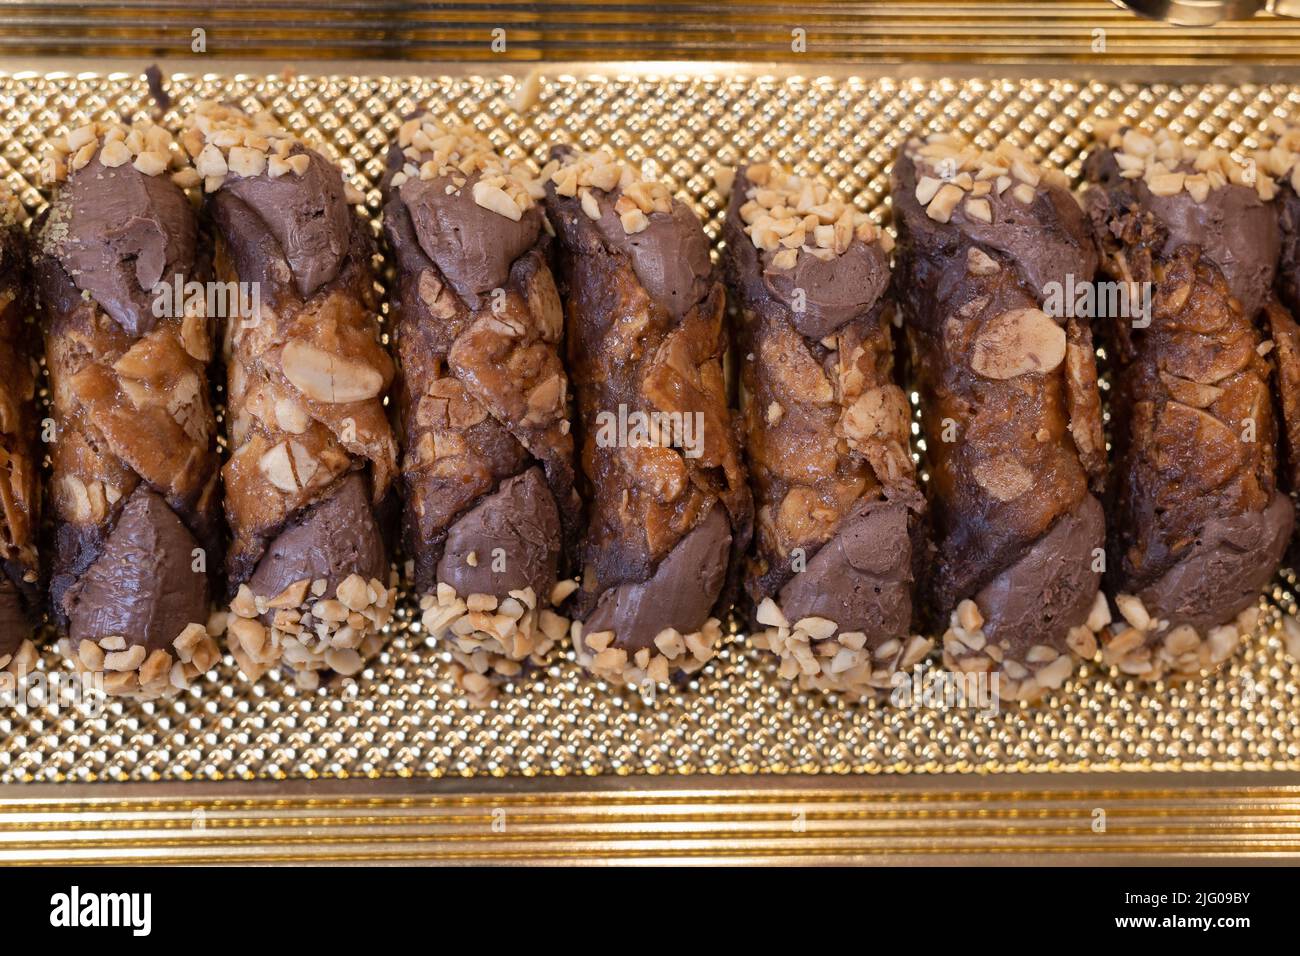 Italian Sweet Dessert, Traditional Sicilian Cannoli with Nuts and Chocolate Cream seen from Above. Stock Photo